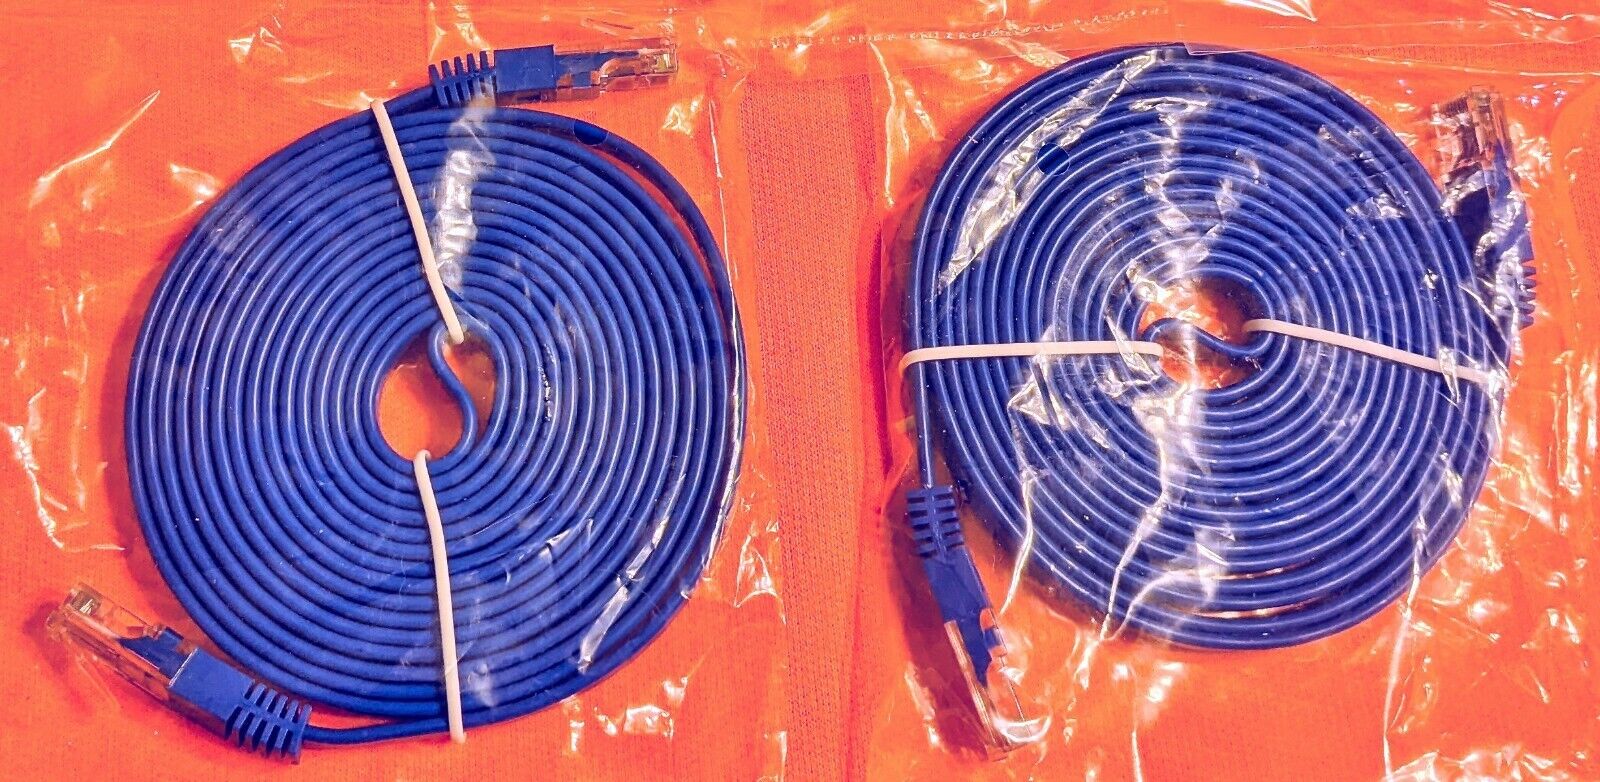 TWO-PACK Spiral-Coiled Blue Ethernet Cables 2x 10ft/3m Cat5e Patch Cord BUY NOW